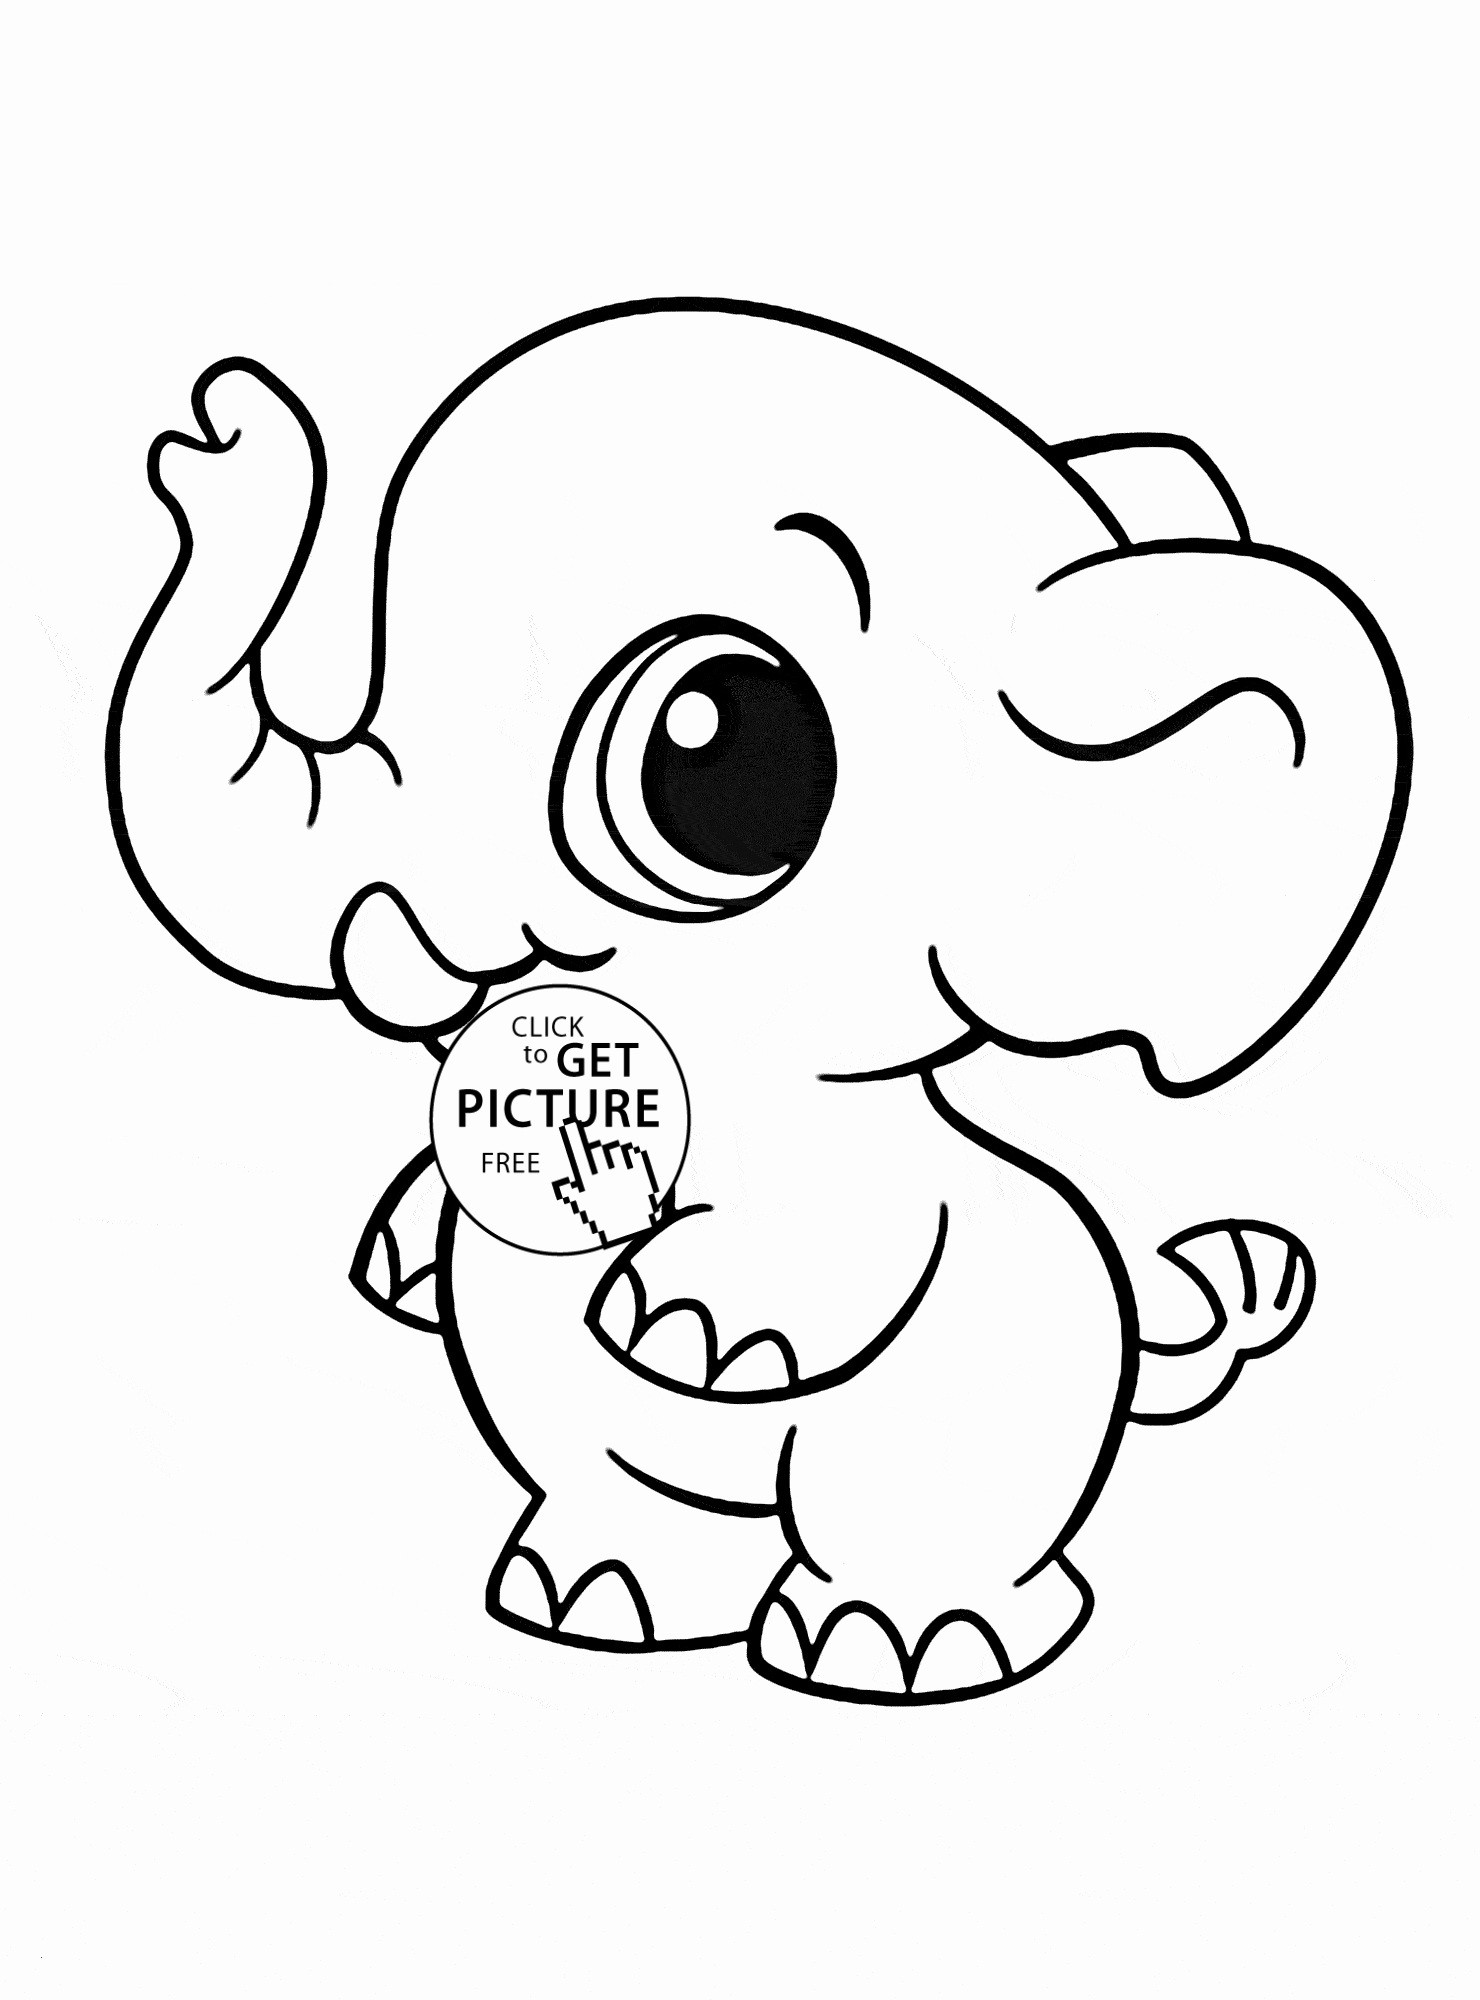 Coloring Book Templates Lovely 18lovely Free Animal Coloring Pages Clip Arts & Coloring Pages